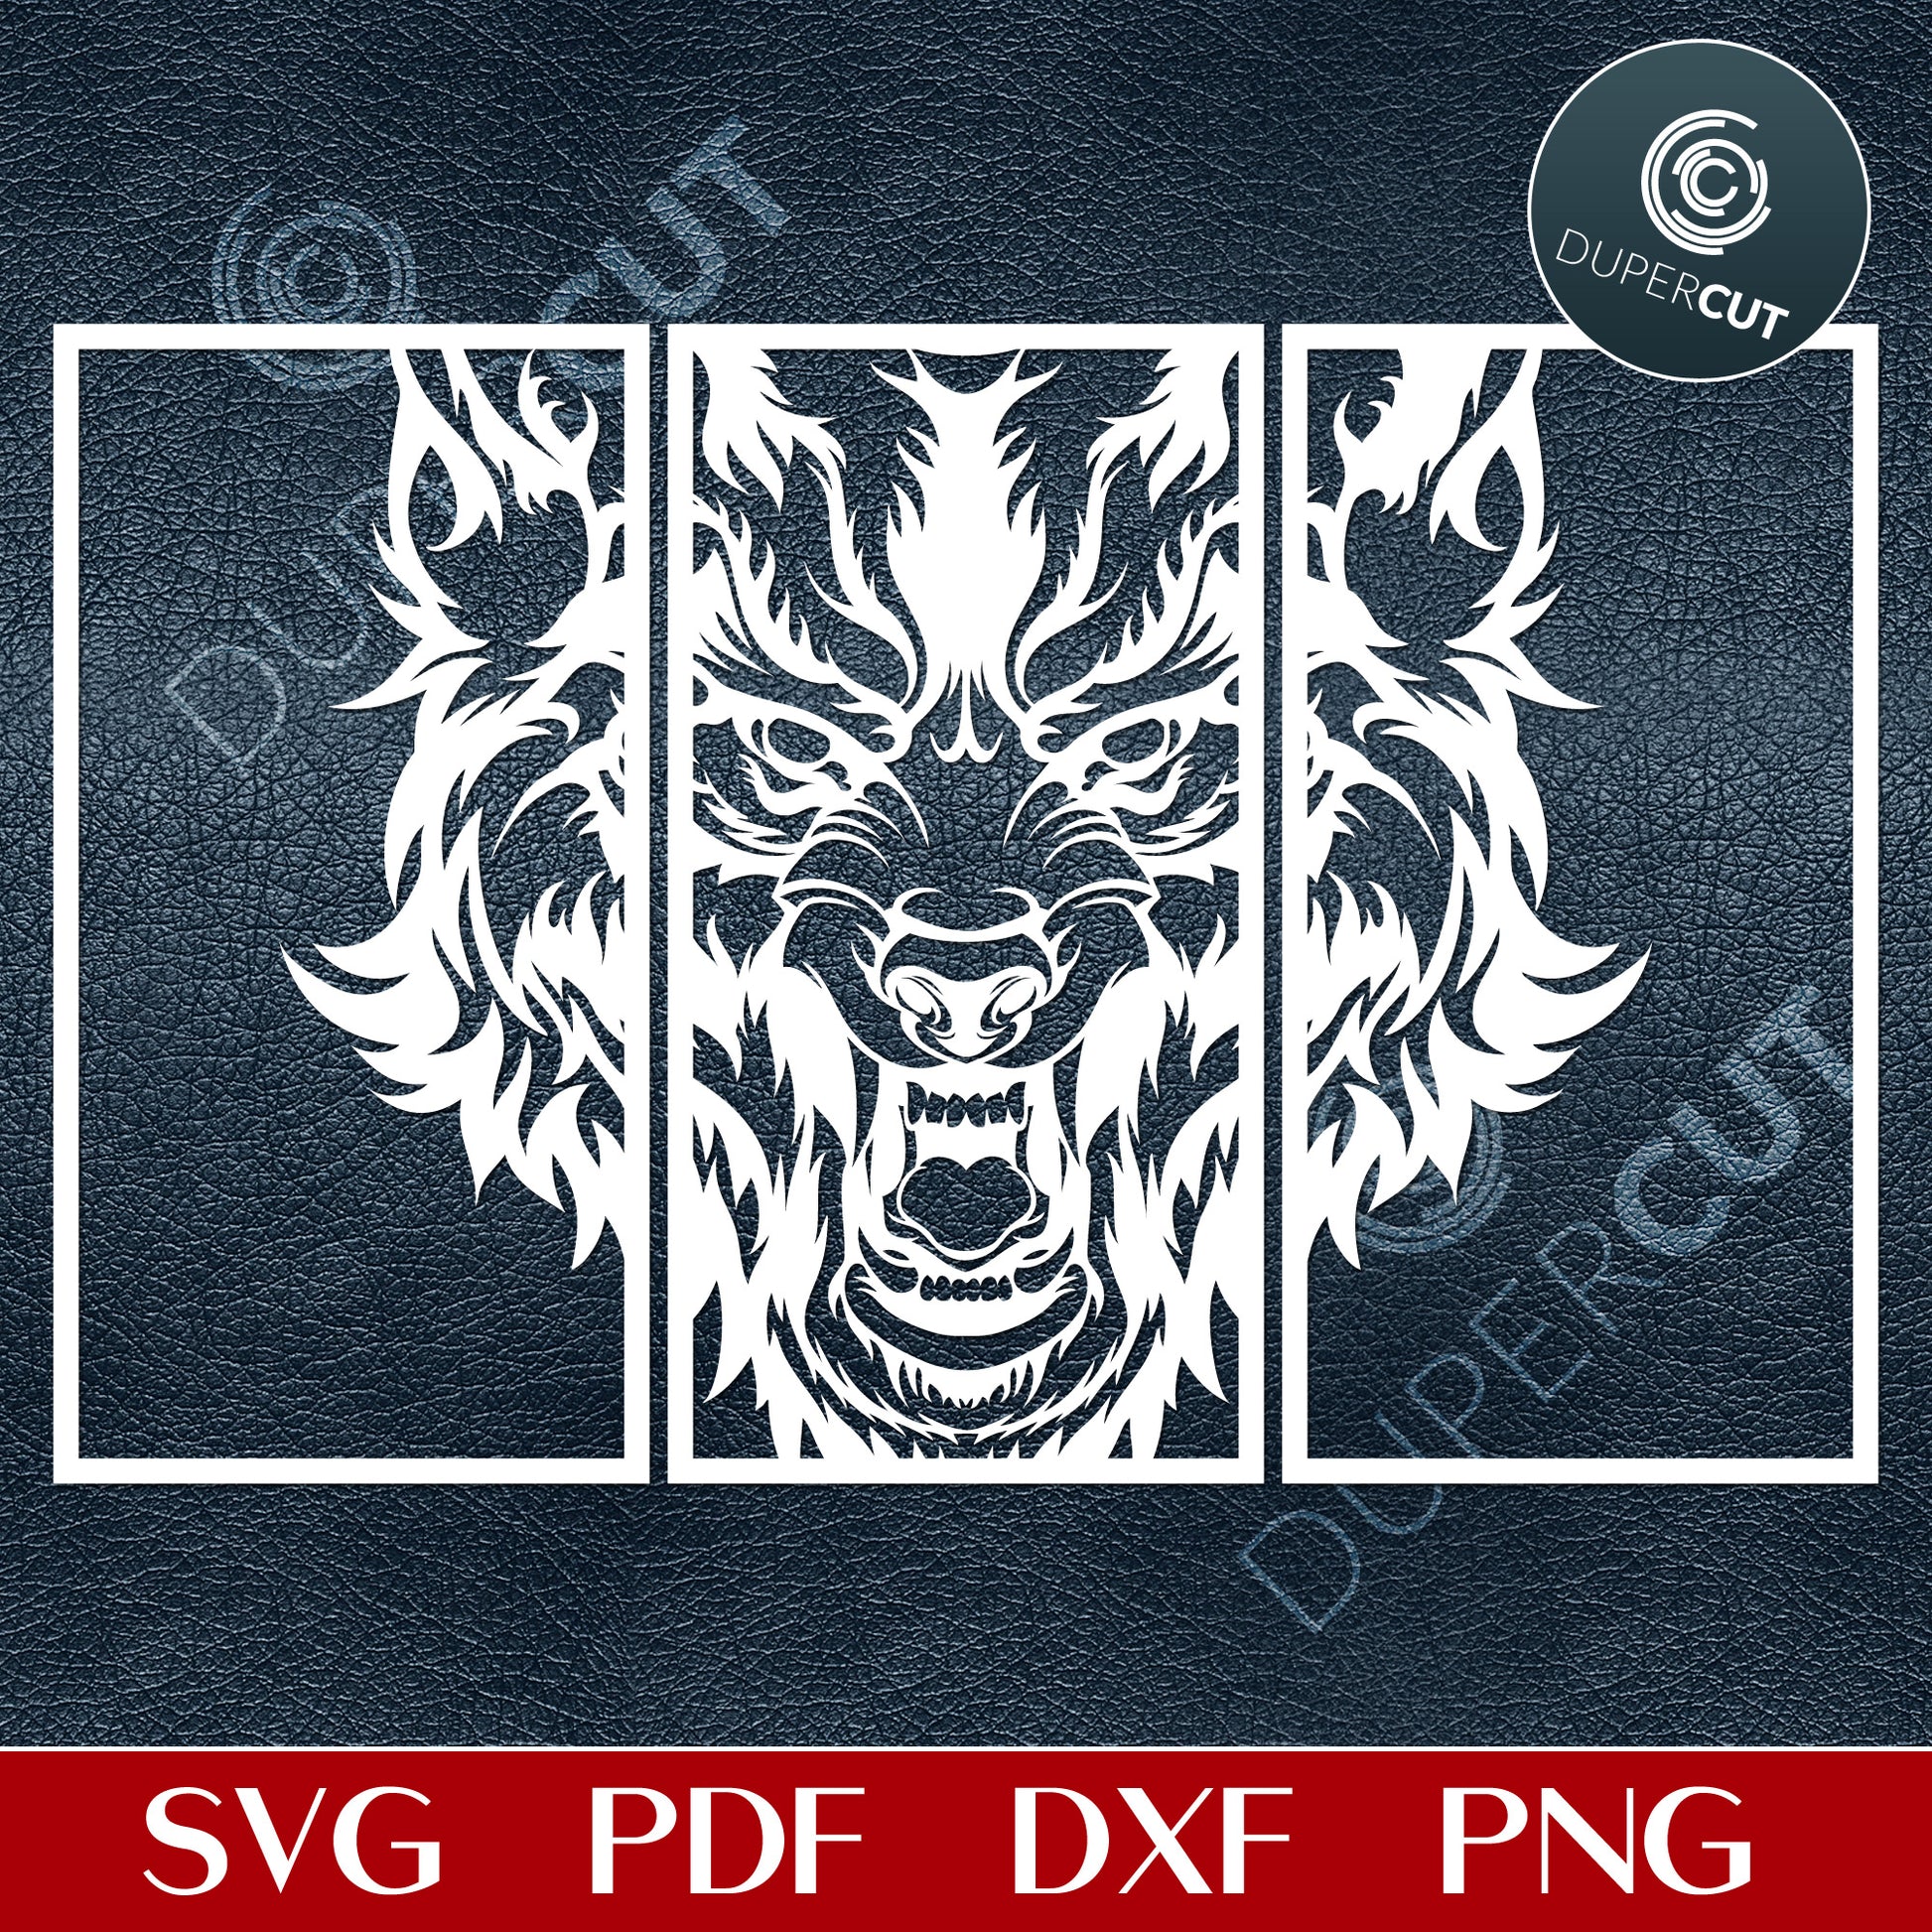 Angry wolf - Three panel wall art paper cutting template - SVG DXF PDF files for Cricut, Glowforge, Silhouette Cameo, CNC Machines